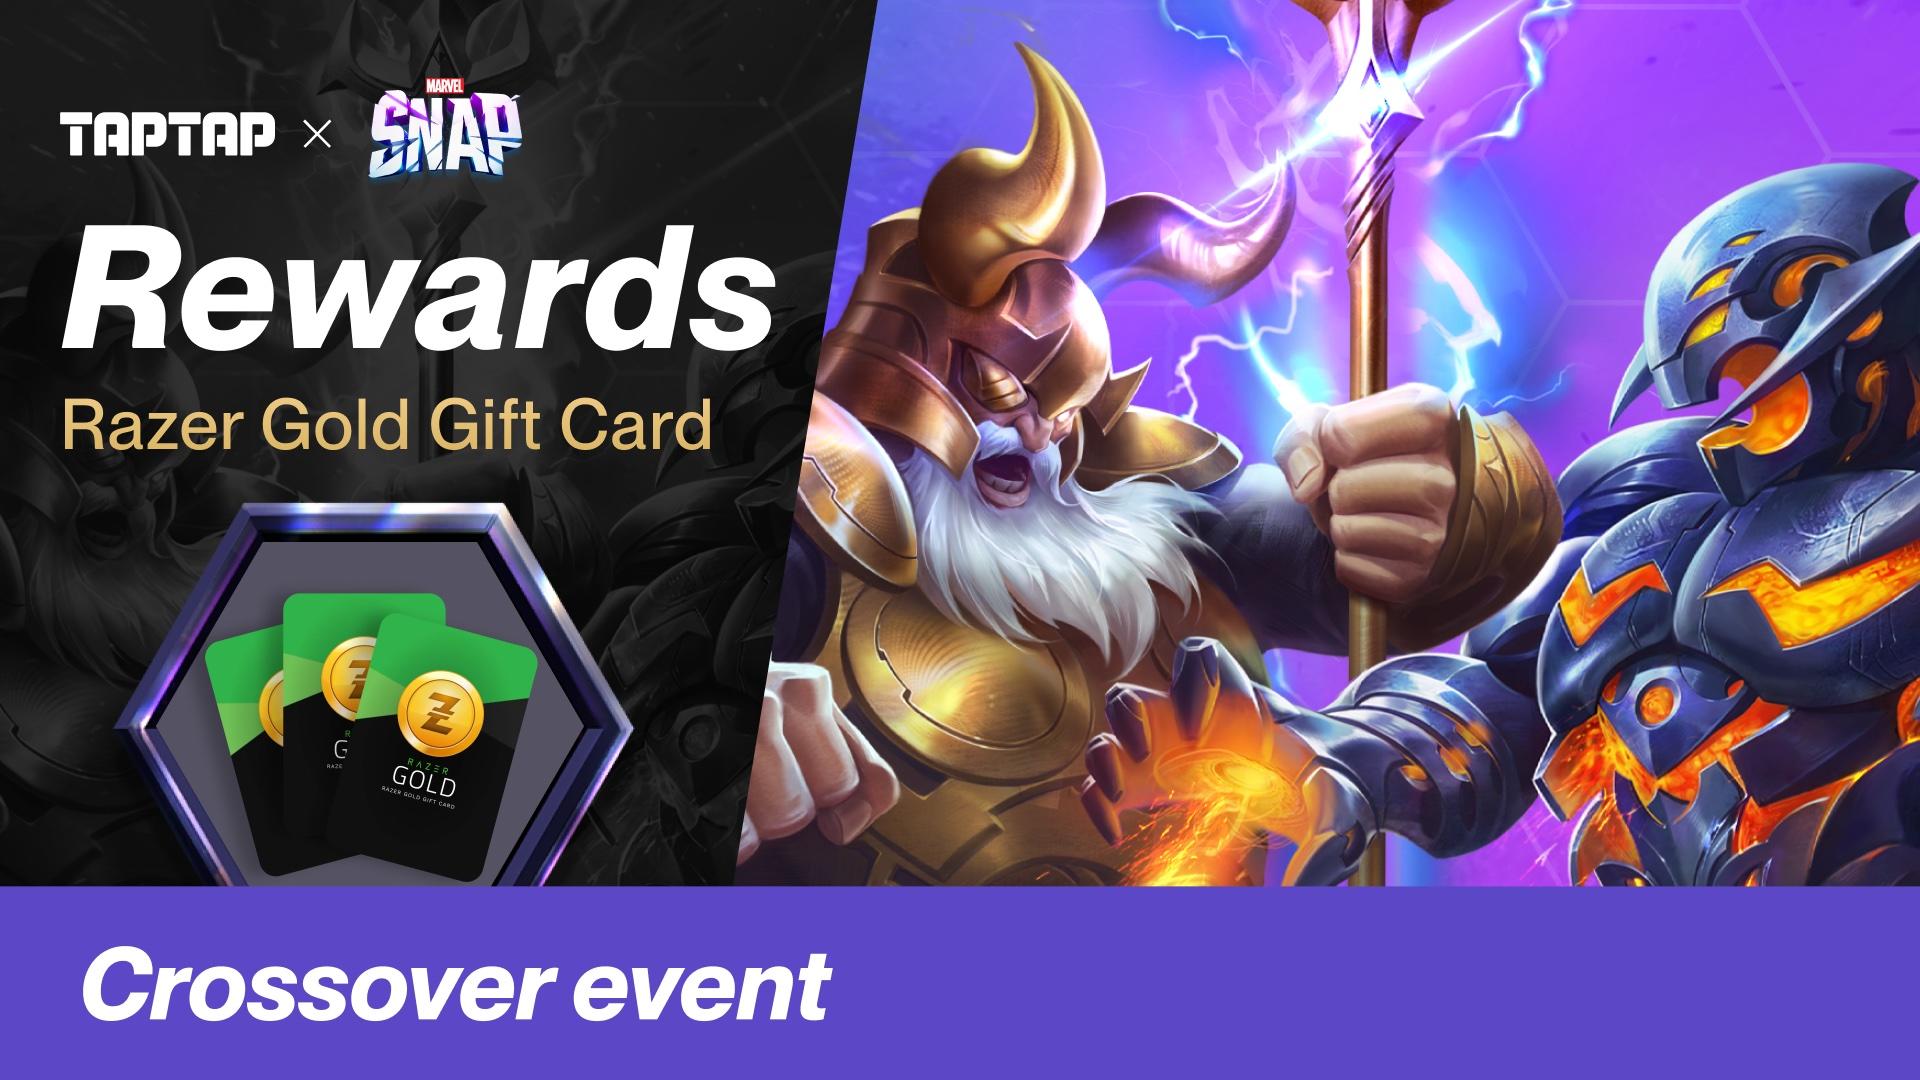 [Event] TapTap x MARVEL SNAP: Who’s your favorite MARVEL SNAP hero? Enter to win awesome rewards!